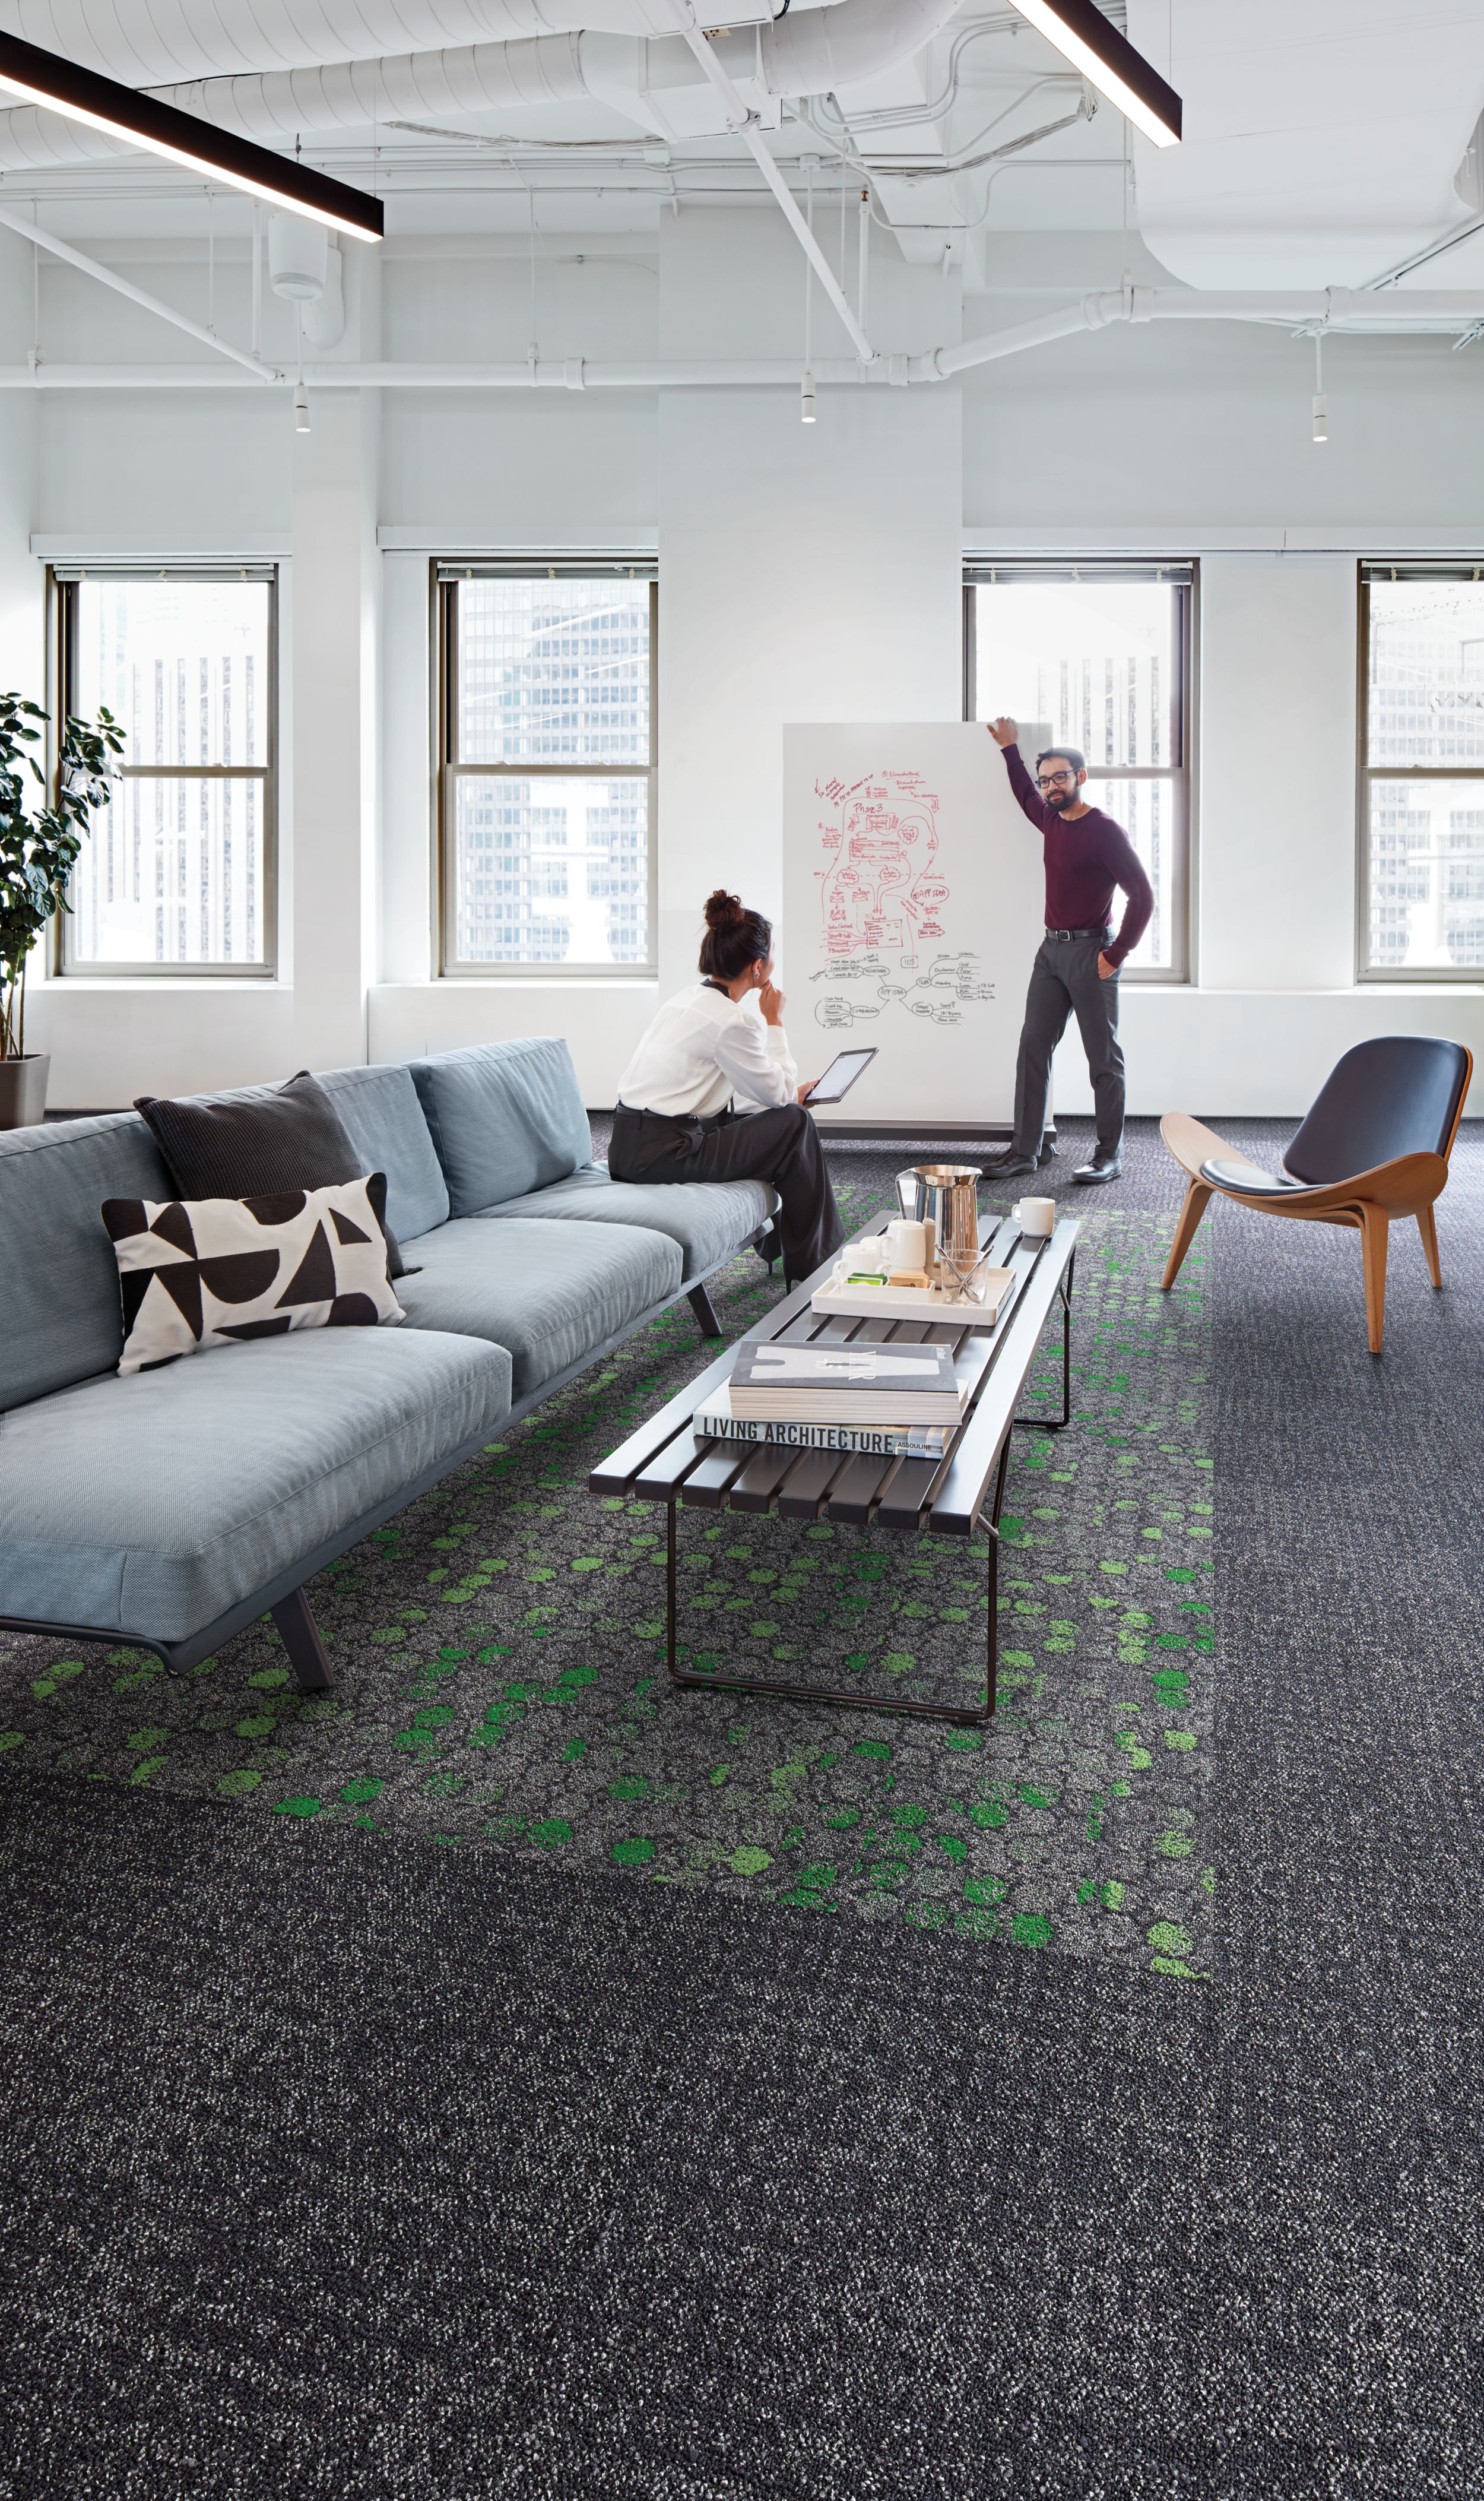 Interface Broome Street and Wheler Street in open office area with people número de imagen 9